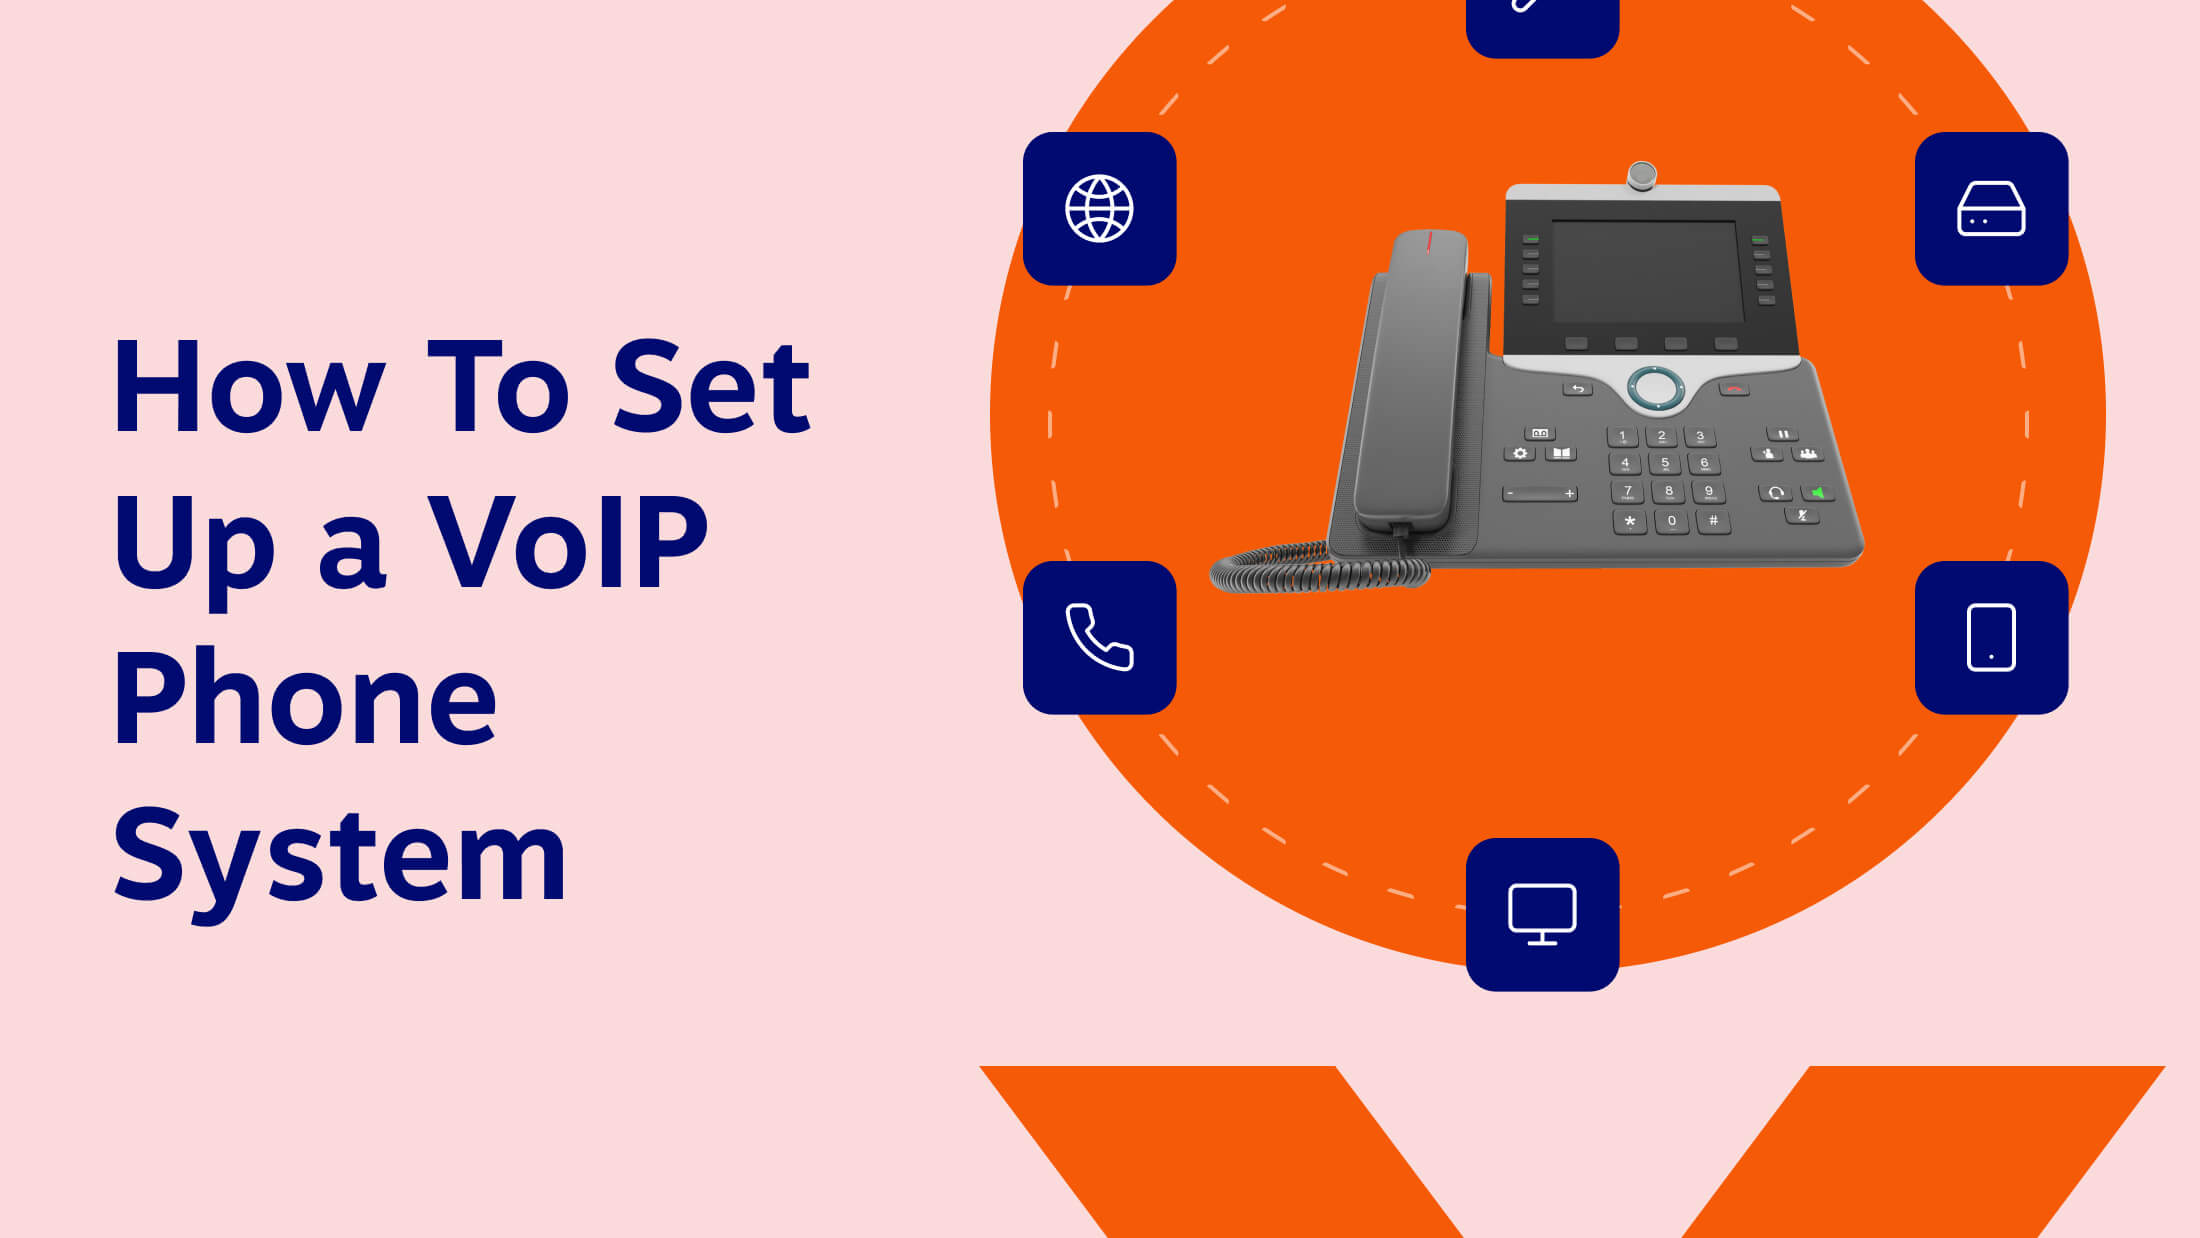 7 Easy Steps to Set Up a VoIP Phone System at Home or the Office